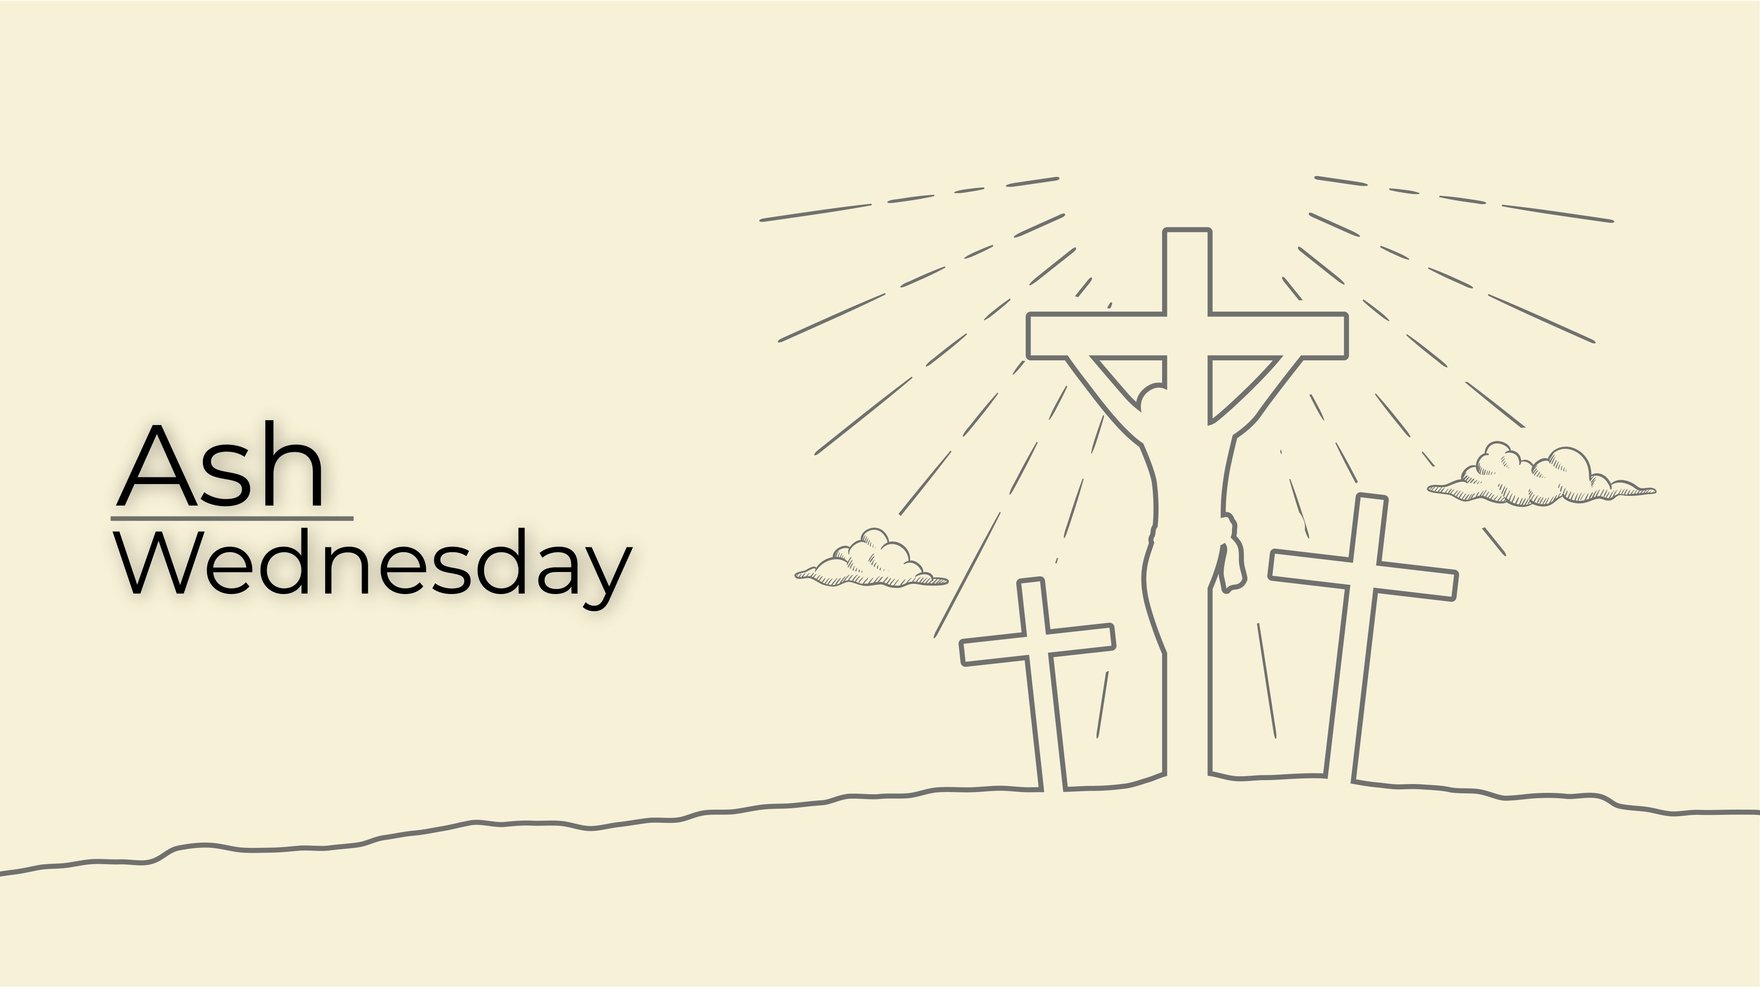 Free Ash Wednesday Drawing Background in PDF, Illustrator, PSD, EPS, SVG, JPG, PNG